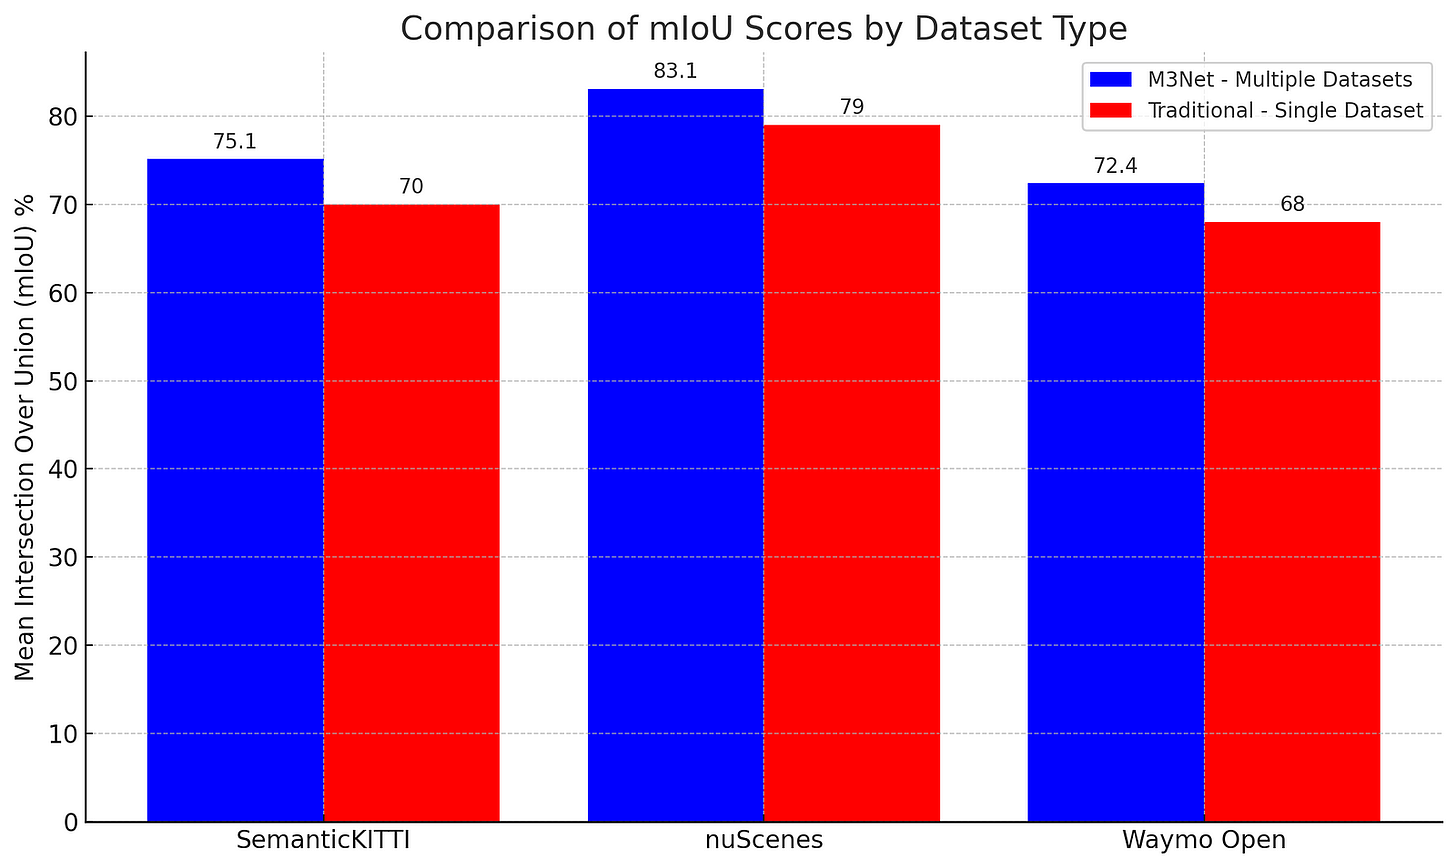 Bar chart comparing the mean Intersection Over Union (mIoU) scores of M3Net on multiple datasets versus traditional models on single datasets across three benchmarks: SemanticKITTI, nuScenes, and Waymo Open. M3Net shows higher mIoU scores in all.